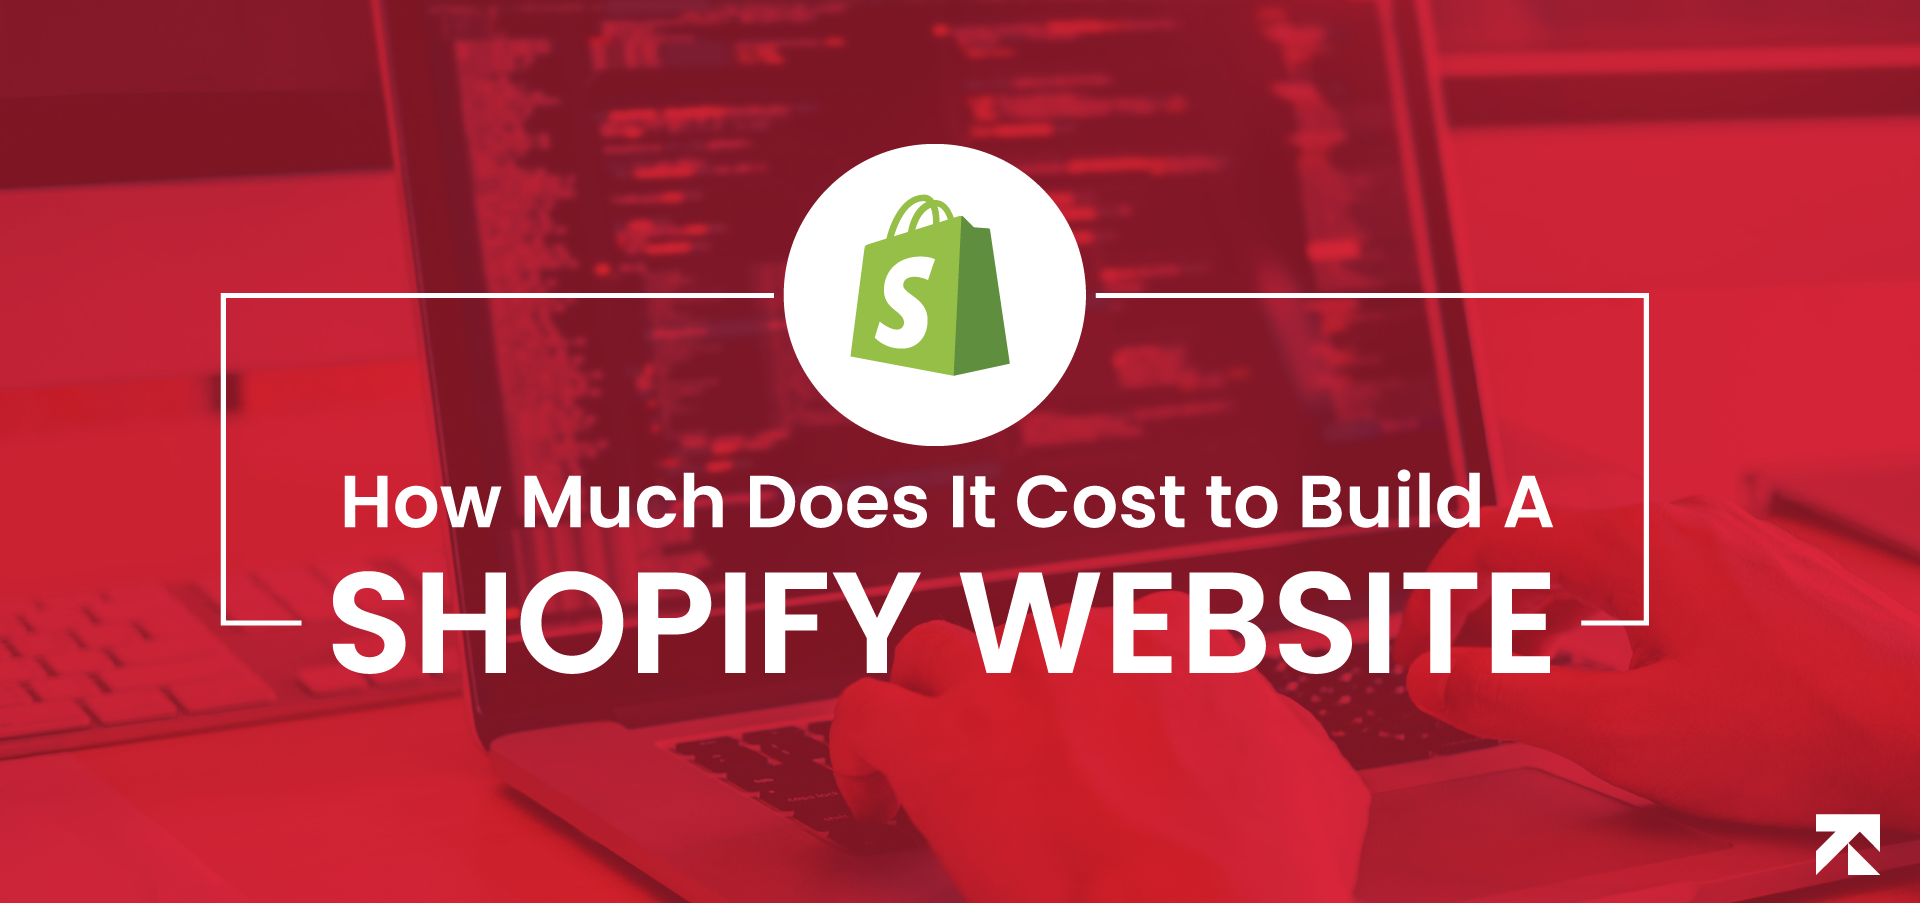 You are currently viewing The cost of building a Shopify website can vary depending on the scope of the work and the features required. Therefore, the amount you should charge to build a Shopify website depends on several factors. Here are some general guidelines from the search results: